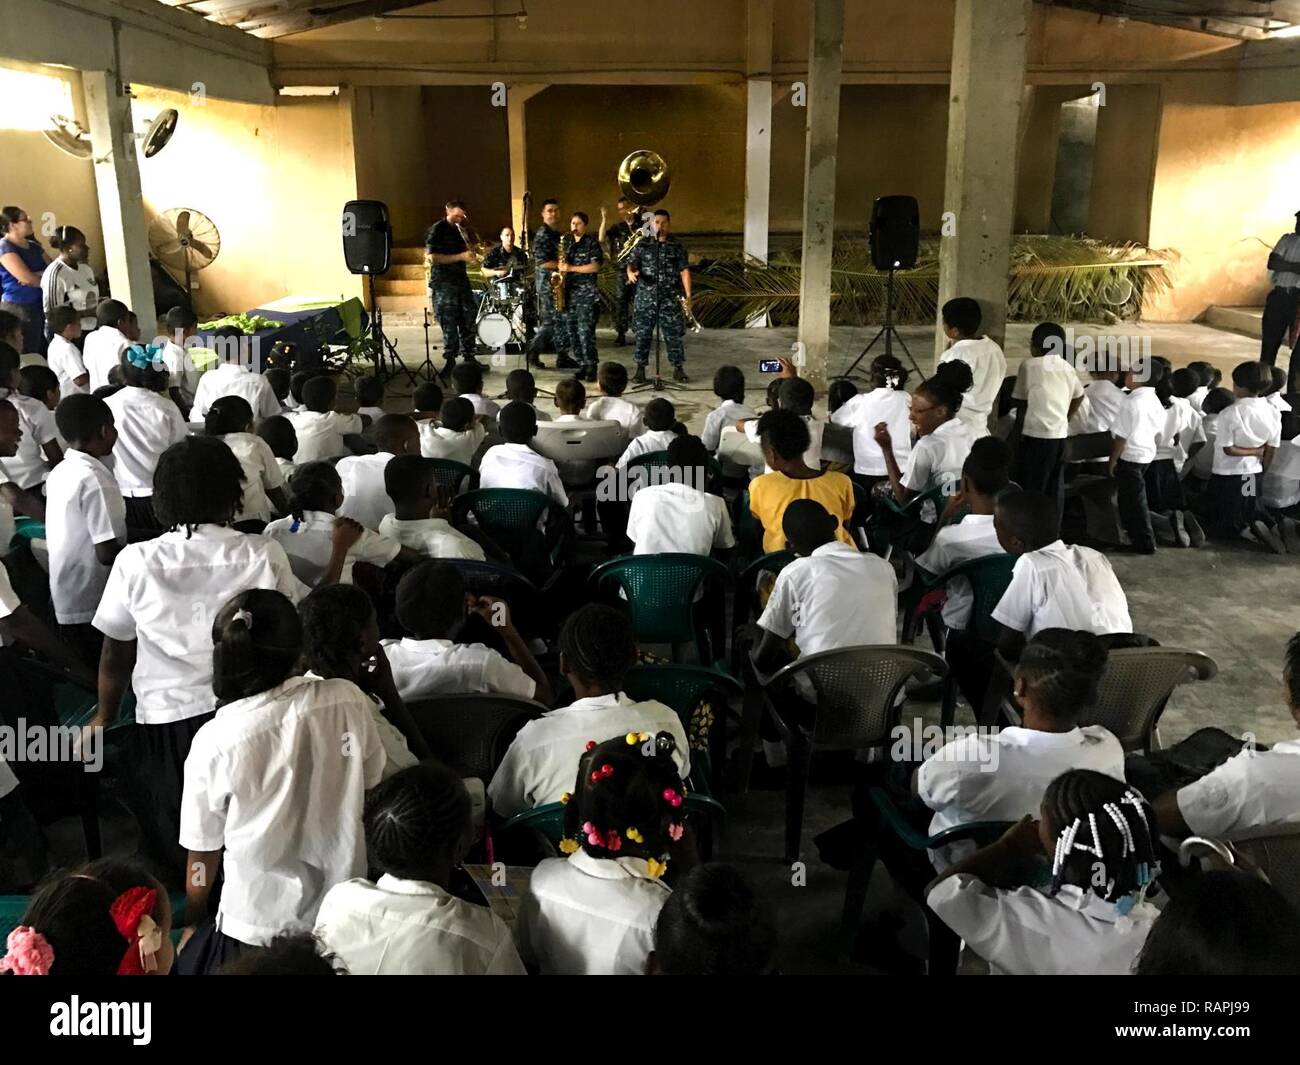 SANTA FE, Honduras (Feb. 22, 2017) – Members of the U.S. Fleet Forces FF) Band, Norfolk, Va., perform for host nation school children in support of Continuing Promise 2017’s (CP-17) visit to Trujillo, Honduras. CP-17 is a U.S. Southern Command-sponsored and U.S. Naval Forces Southern Command/U.S. 4th Fleet-conducted deployment to conduct civil-military operations including humanitarian assistance, training engagements, and medical, dental, and veterinary support in an effort to show U.S. support and commitment to Central and South America. Stock Photo